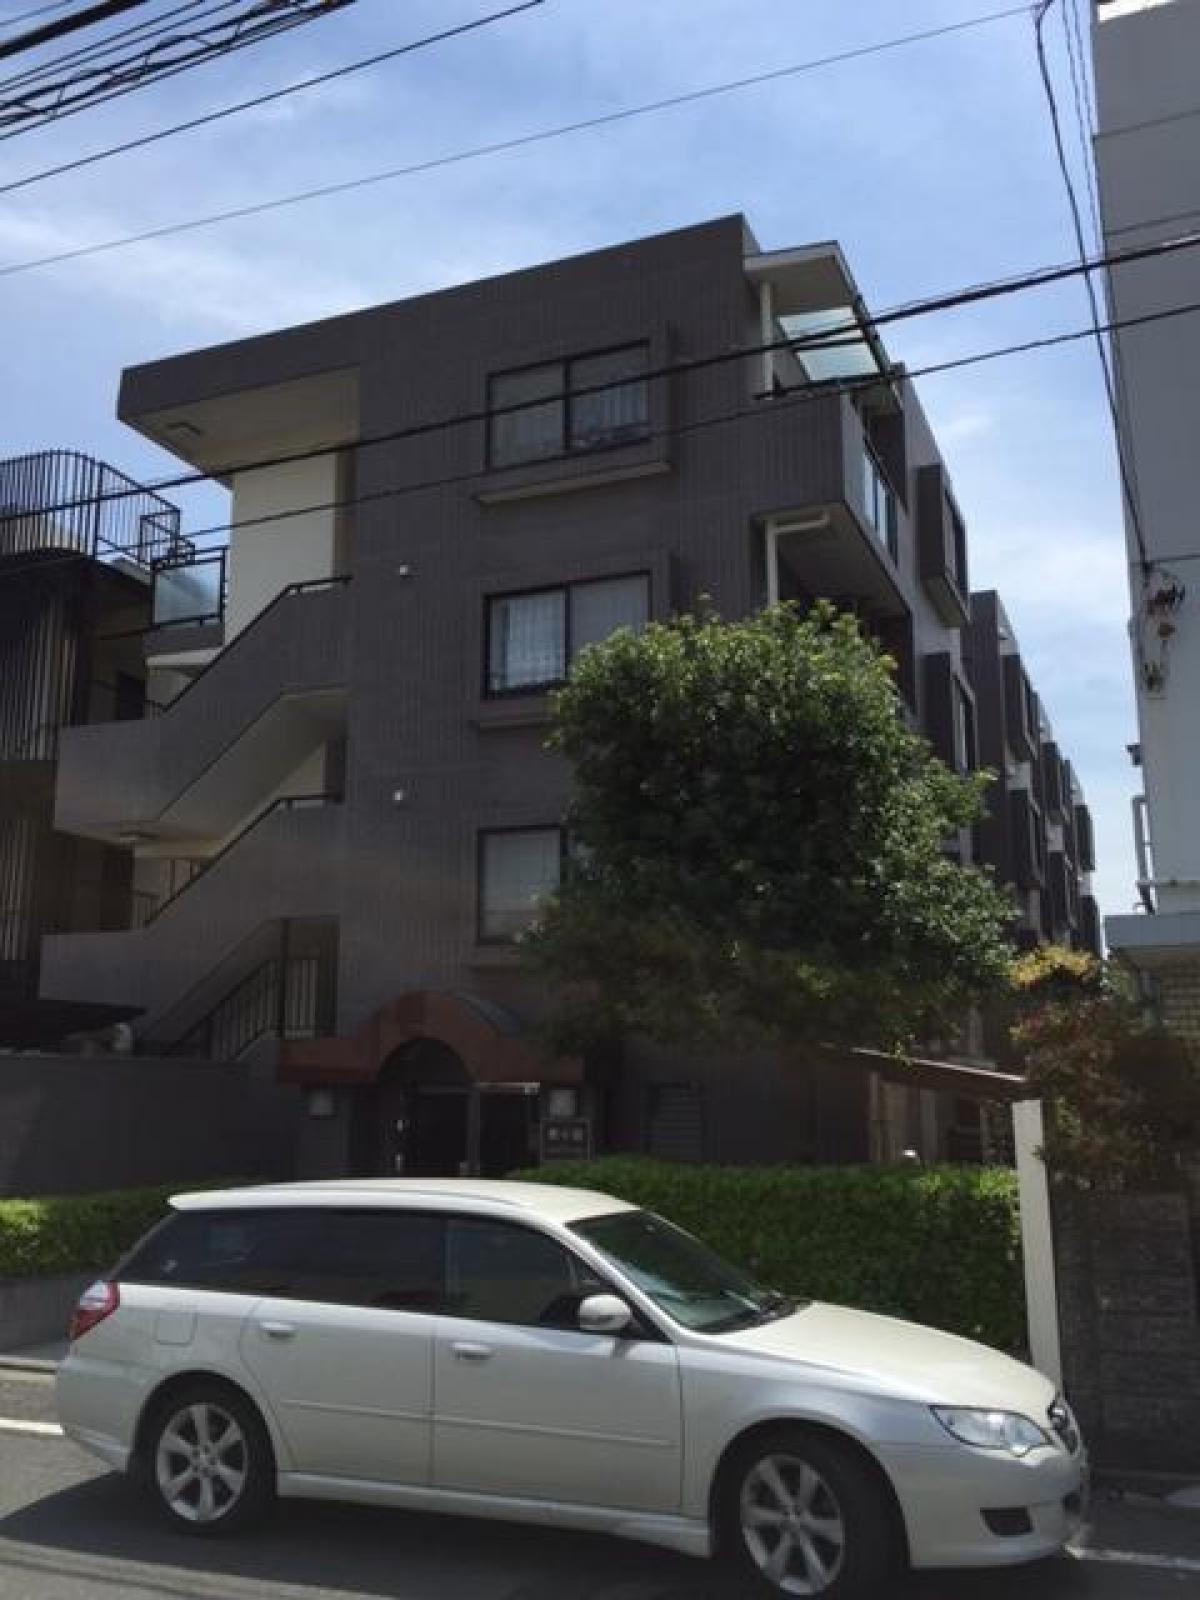 Picture of Apartment For Sale in Edogawa Ku, Tokyo, Japan